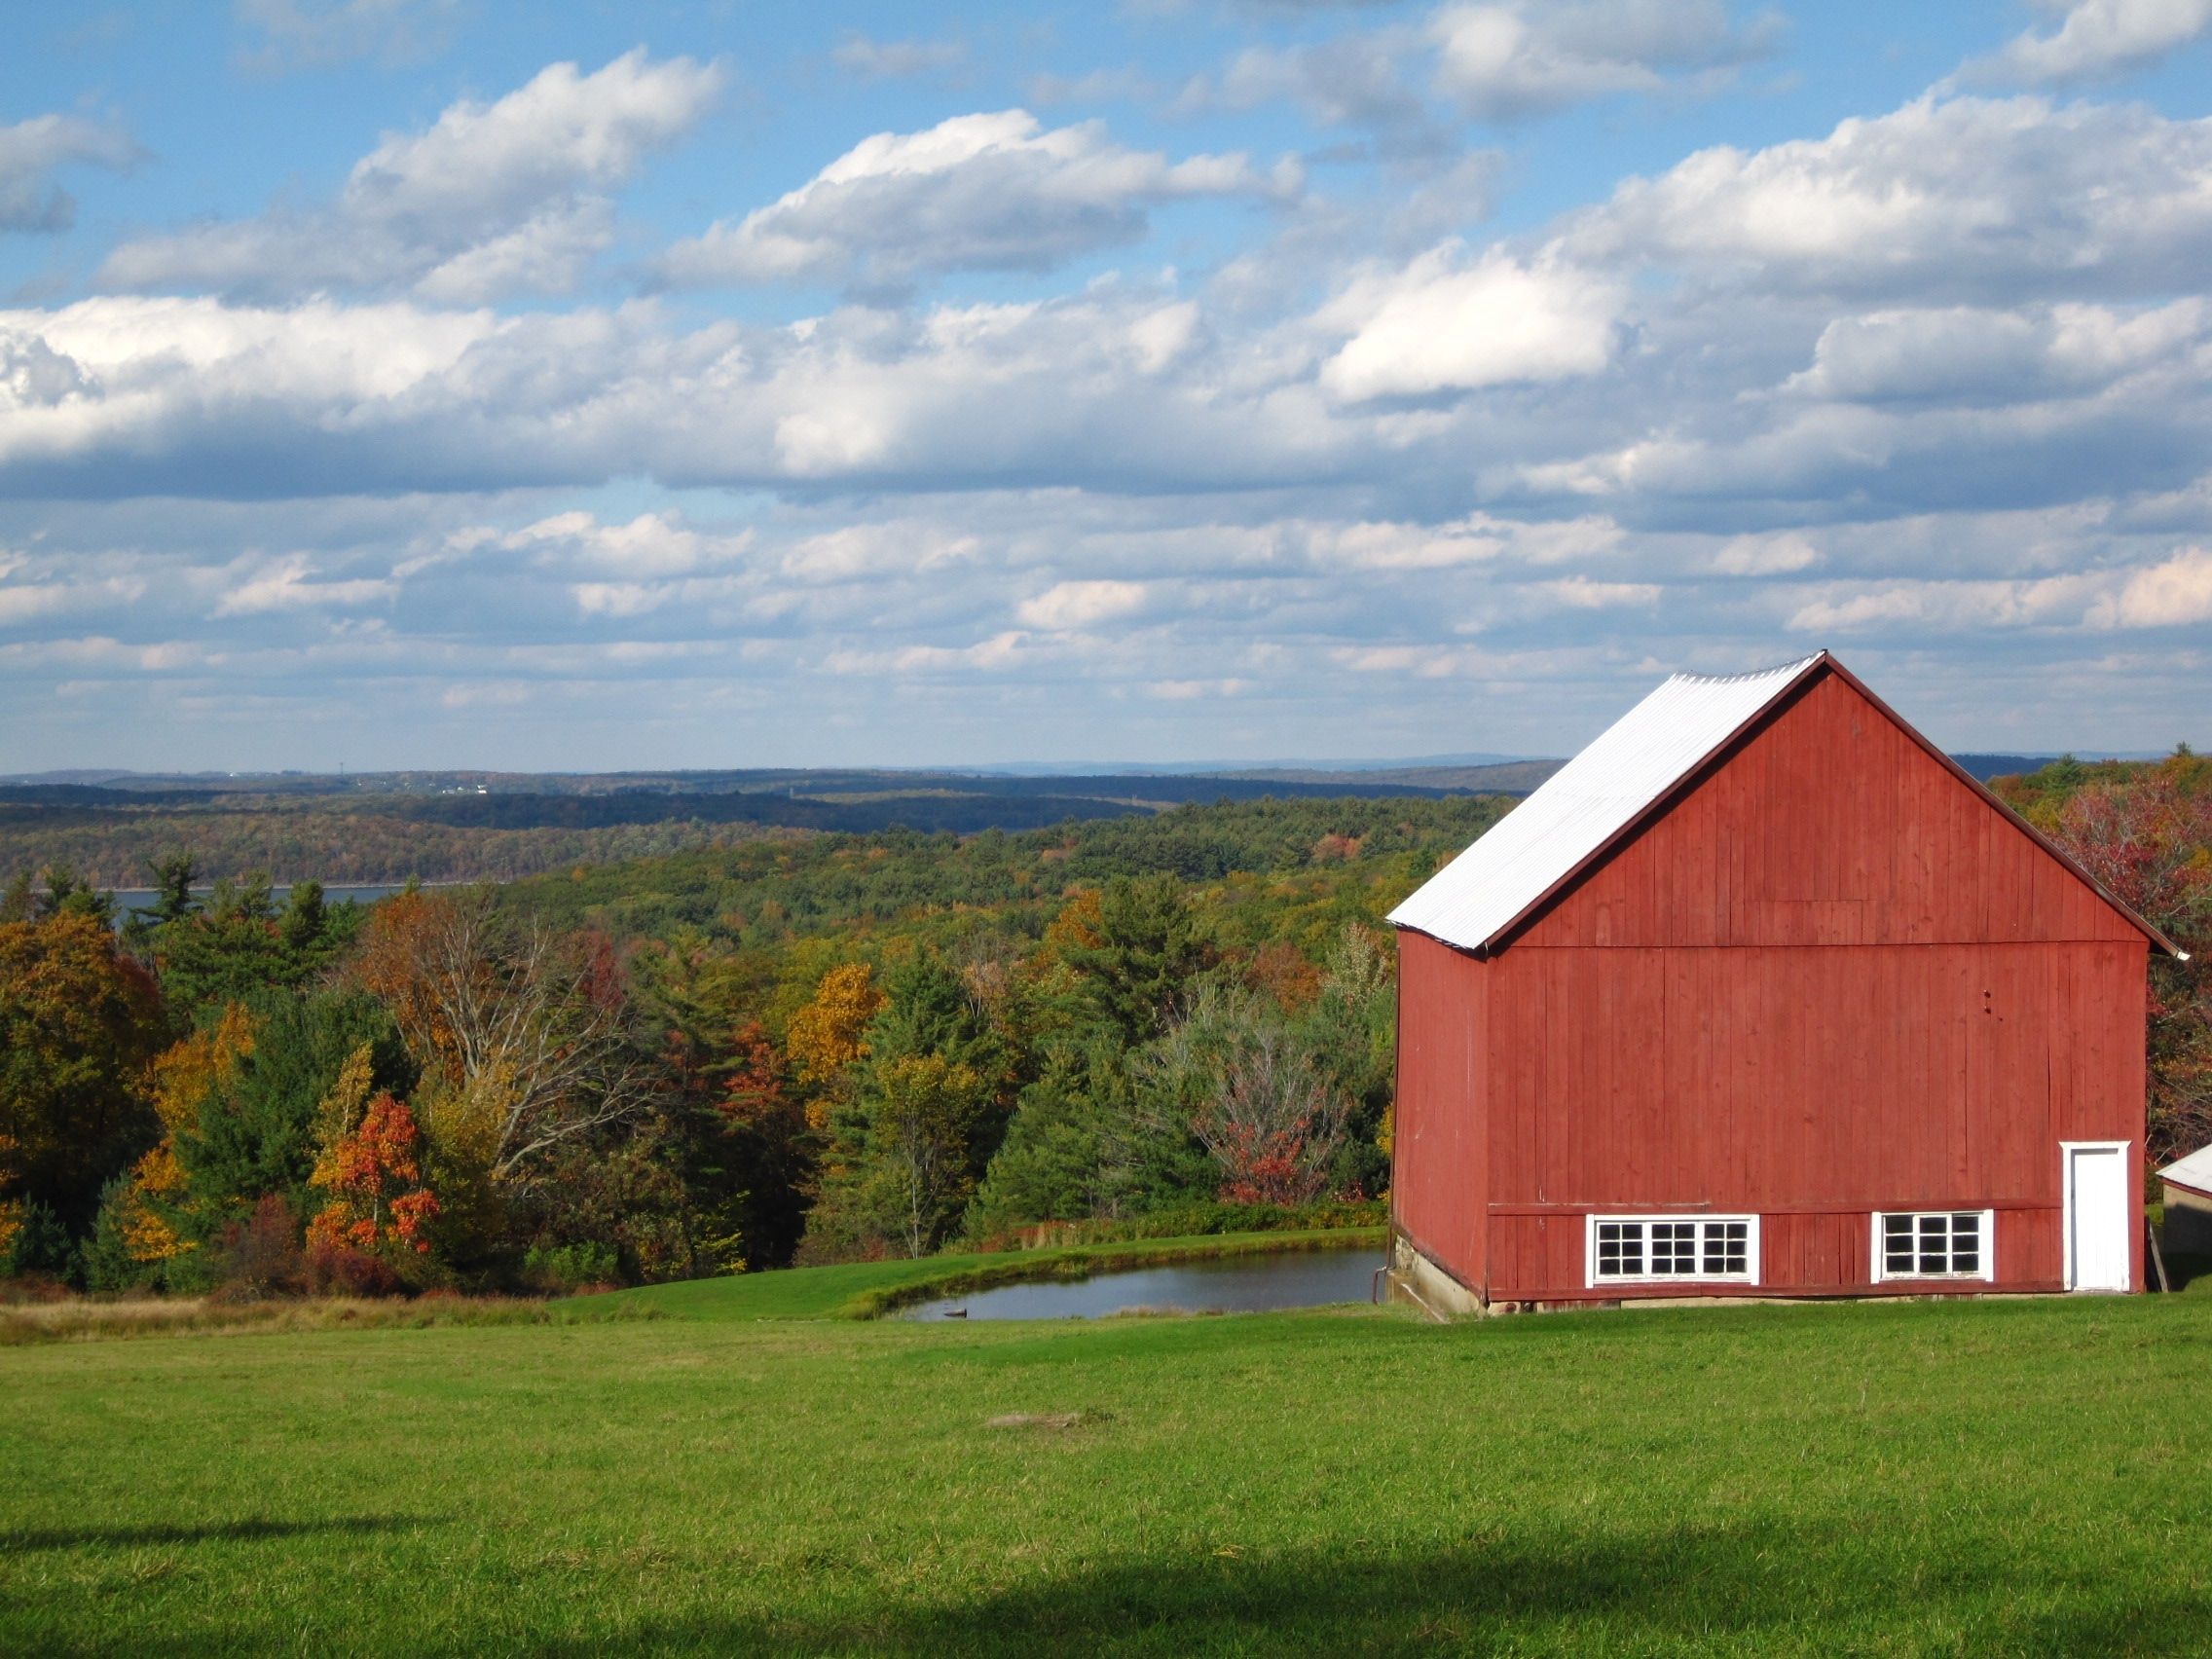 red barn on grass field free image